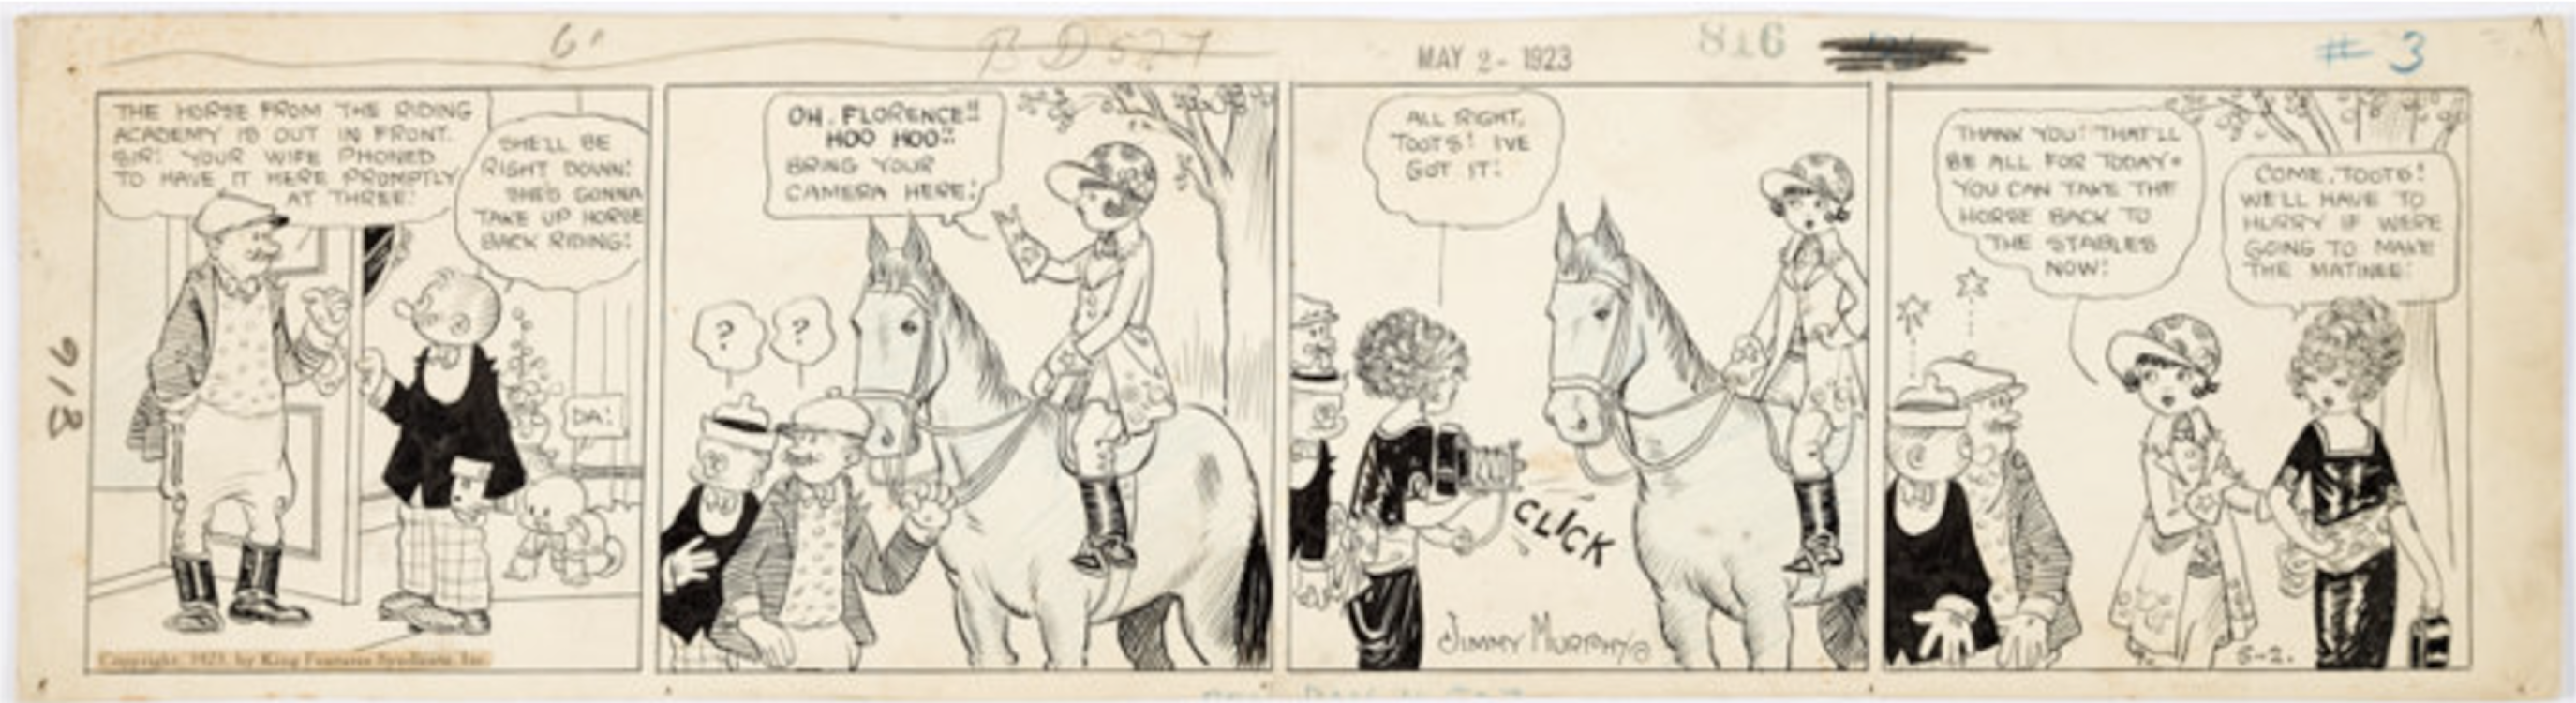 Toots and Casper Daily Comic Strip 5-2-23 by Jimmy Murphy sold for $335. Click here to get your original art appraised.